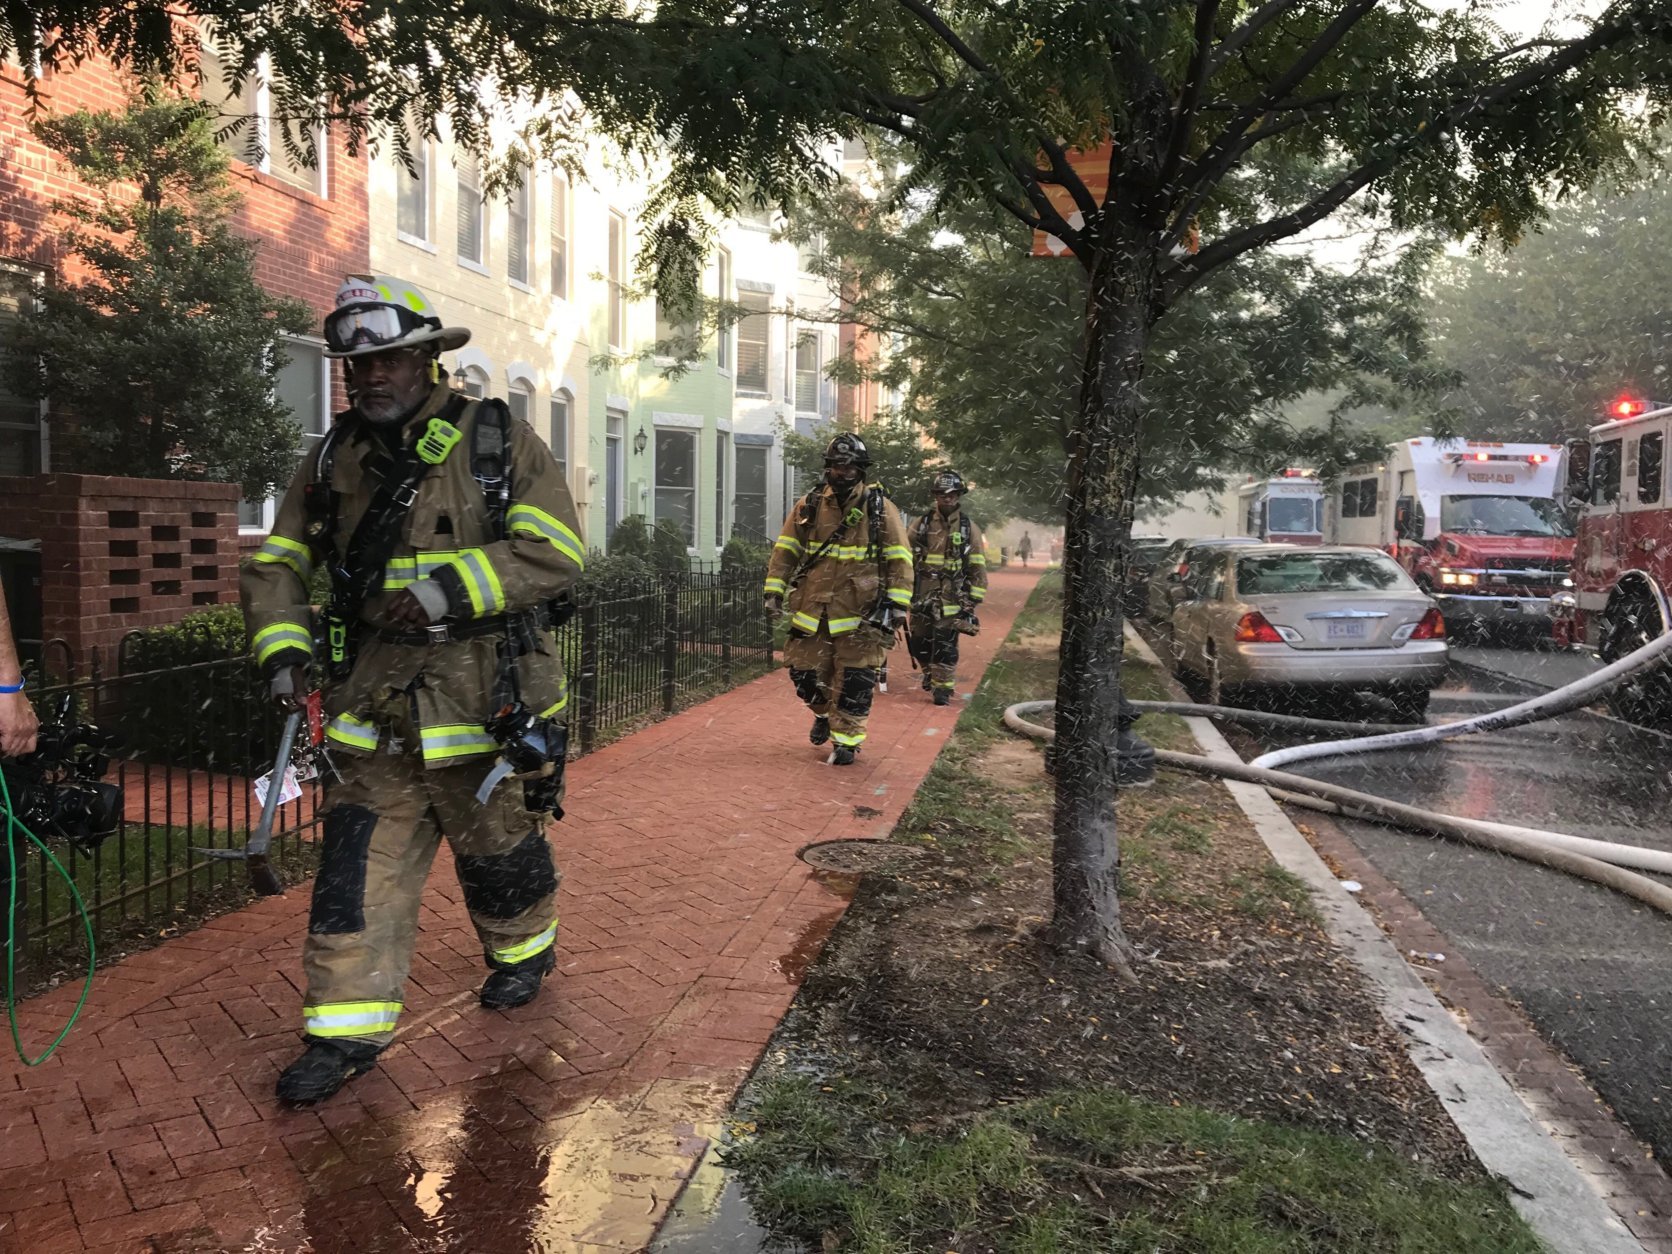 Firefighters work to put out the blaze at 900 5th St. SE in D.C. (WTOP/Dick Uliano)